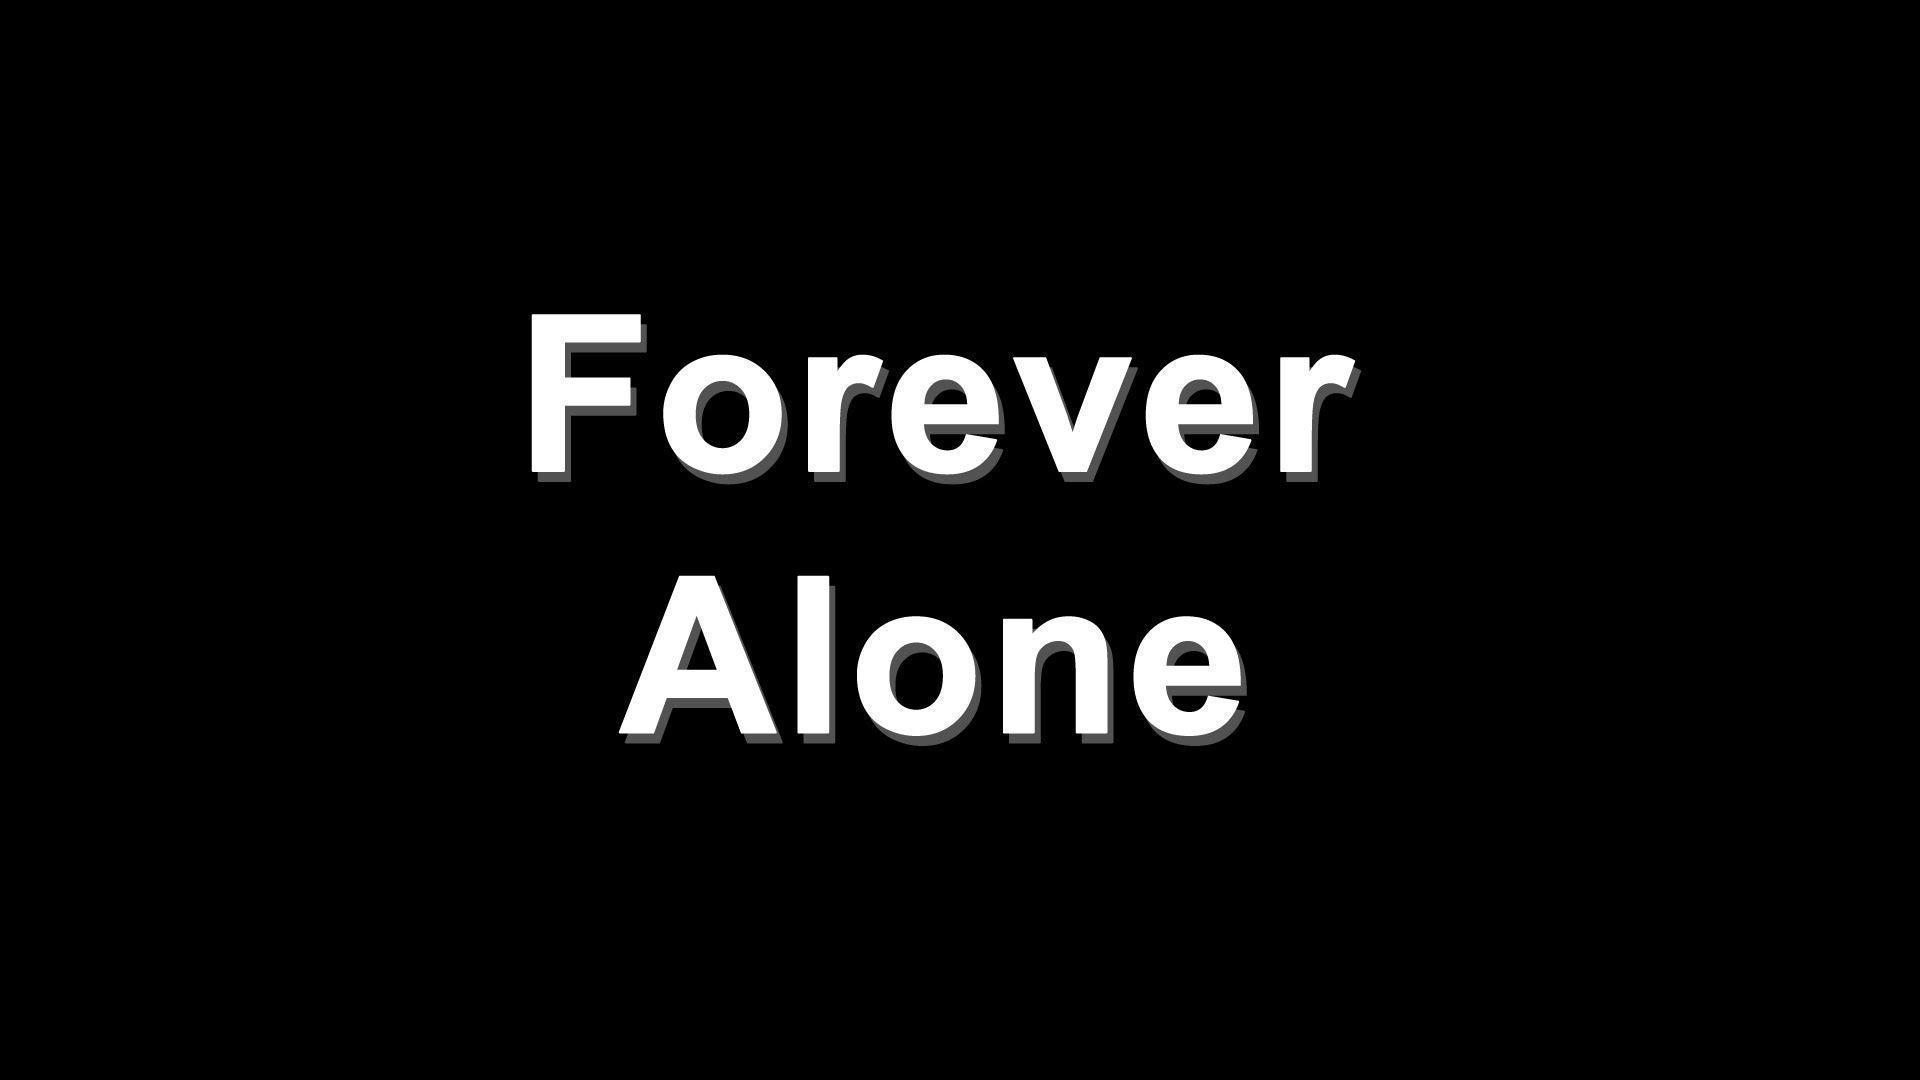 Tons of awesome alone forever wallpapers to download for free. 